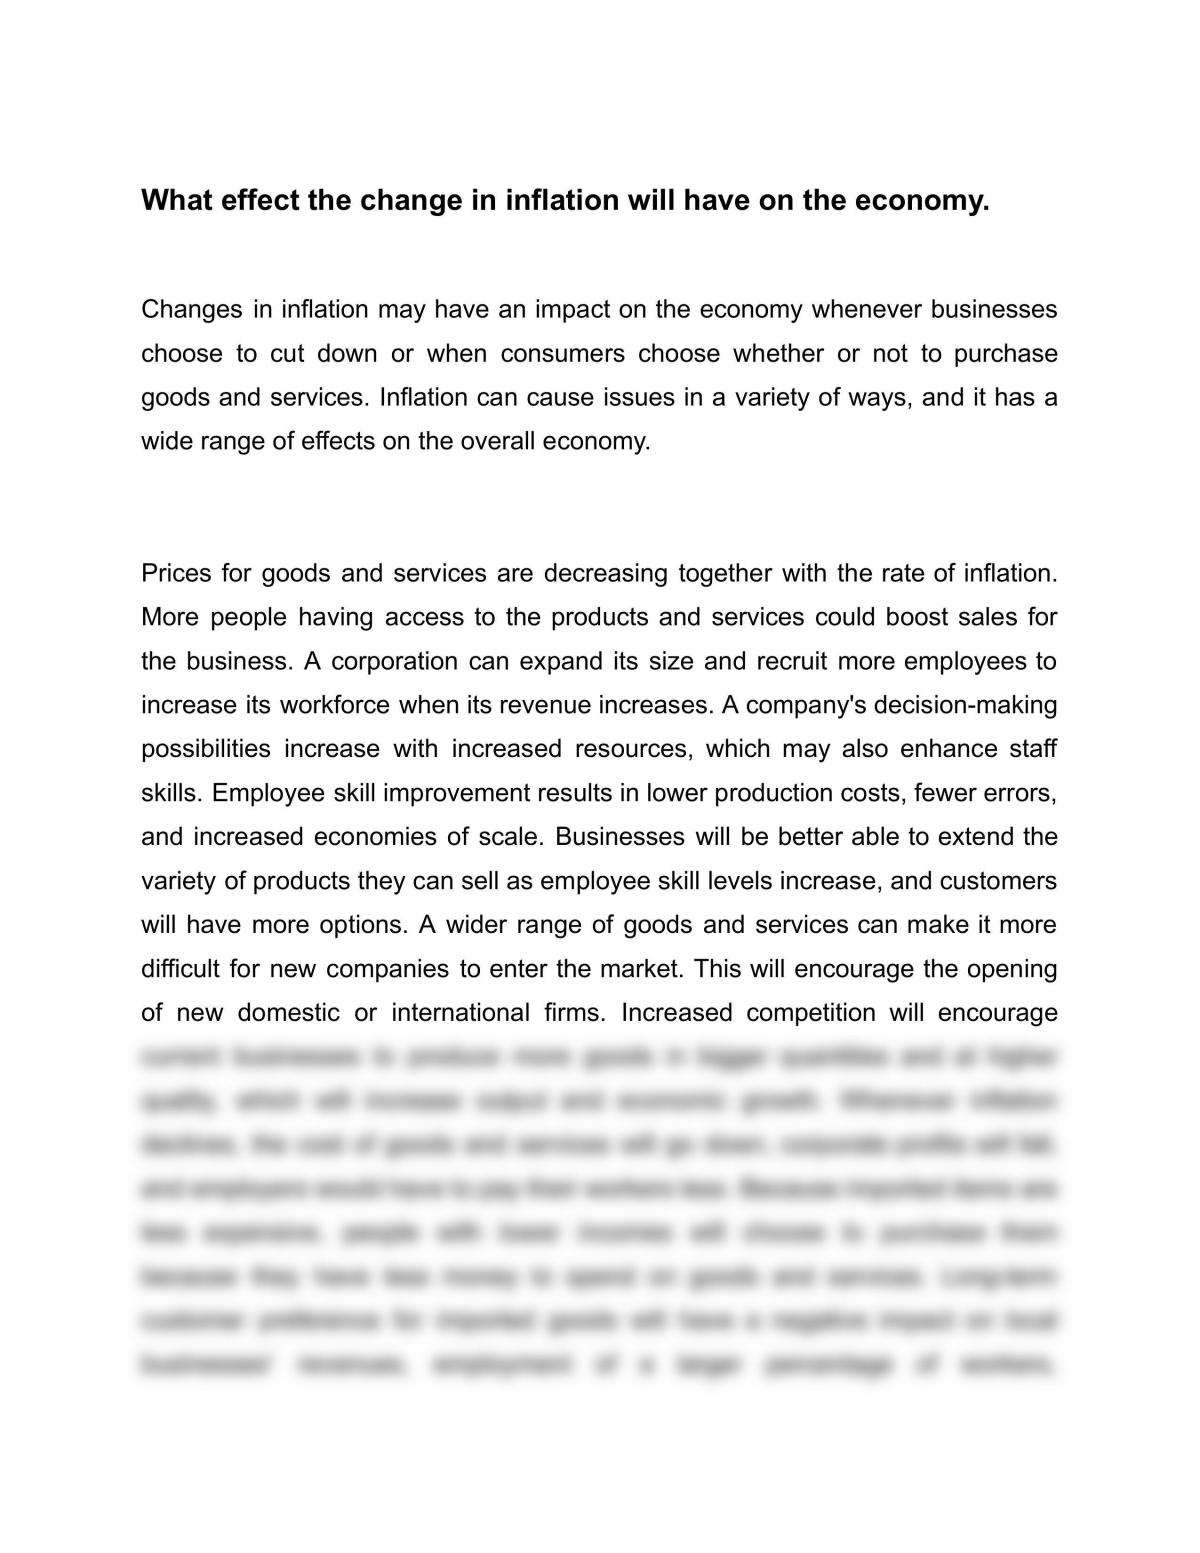 essay about effects of inflation